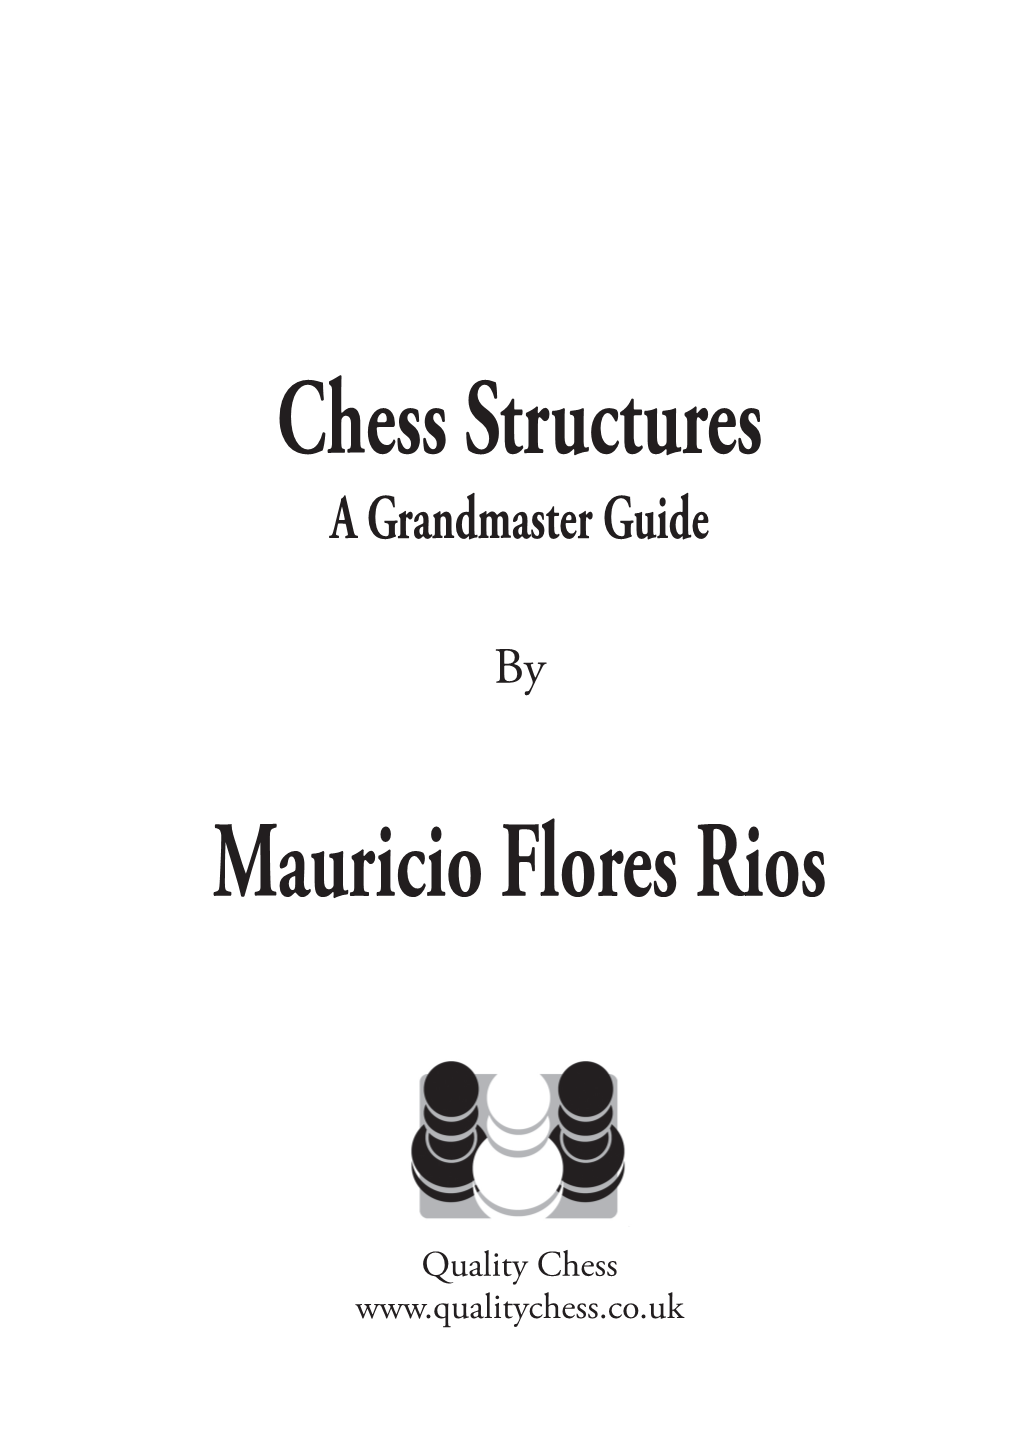 Chess Structures a Grandmaster Guide